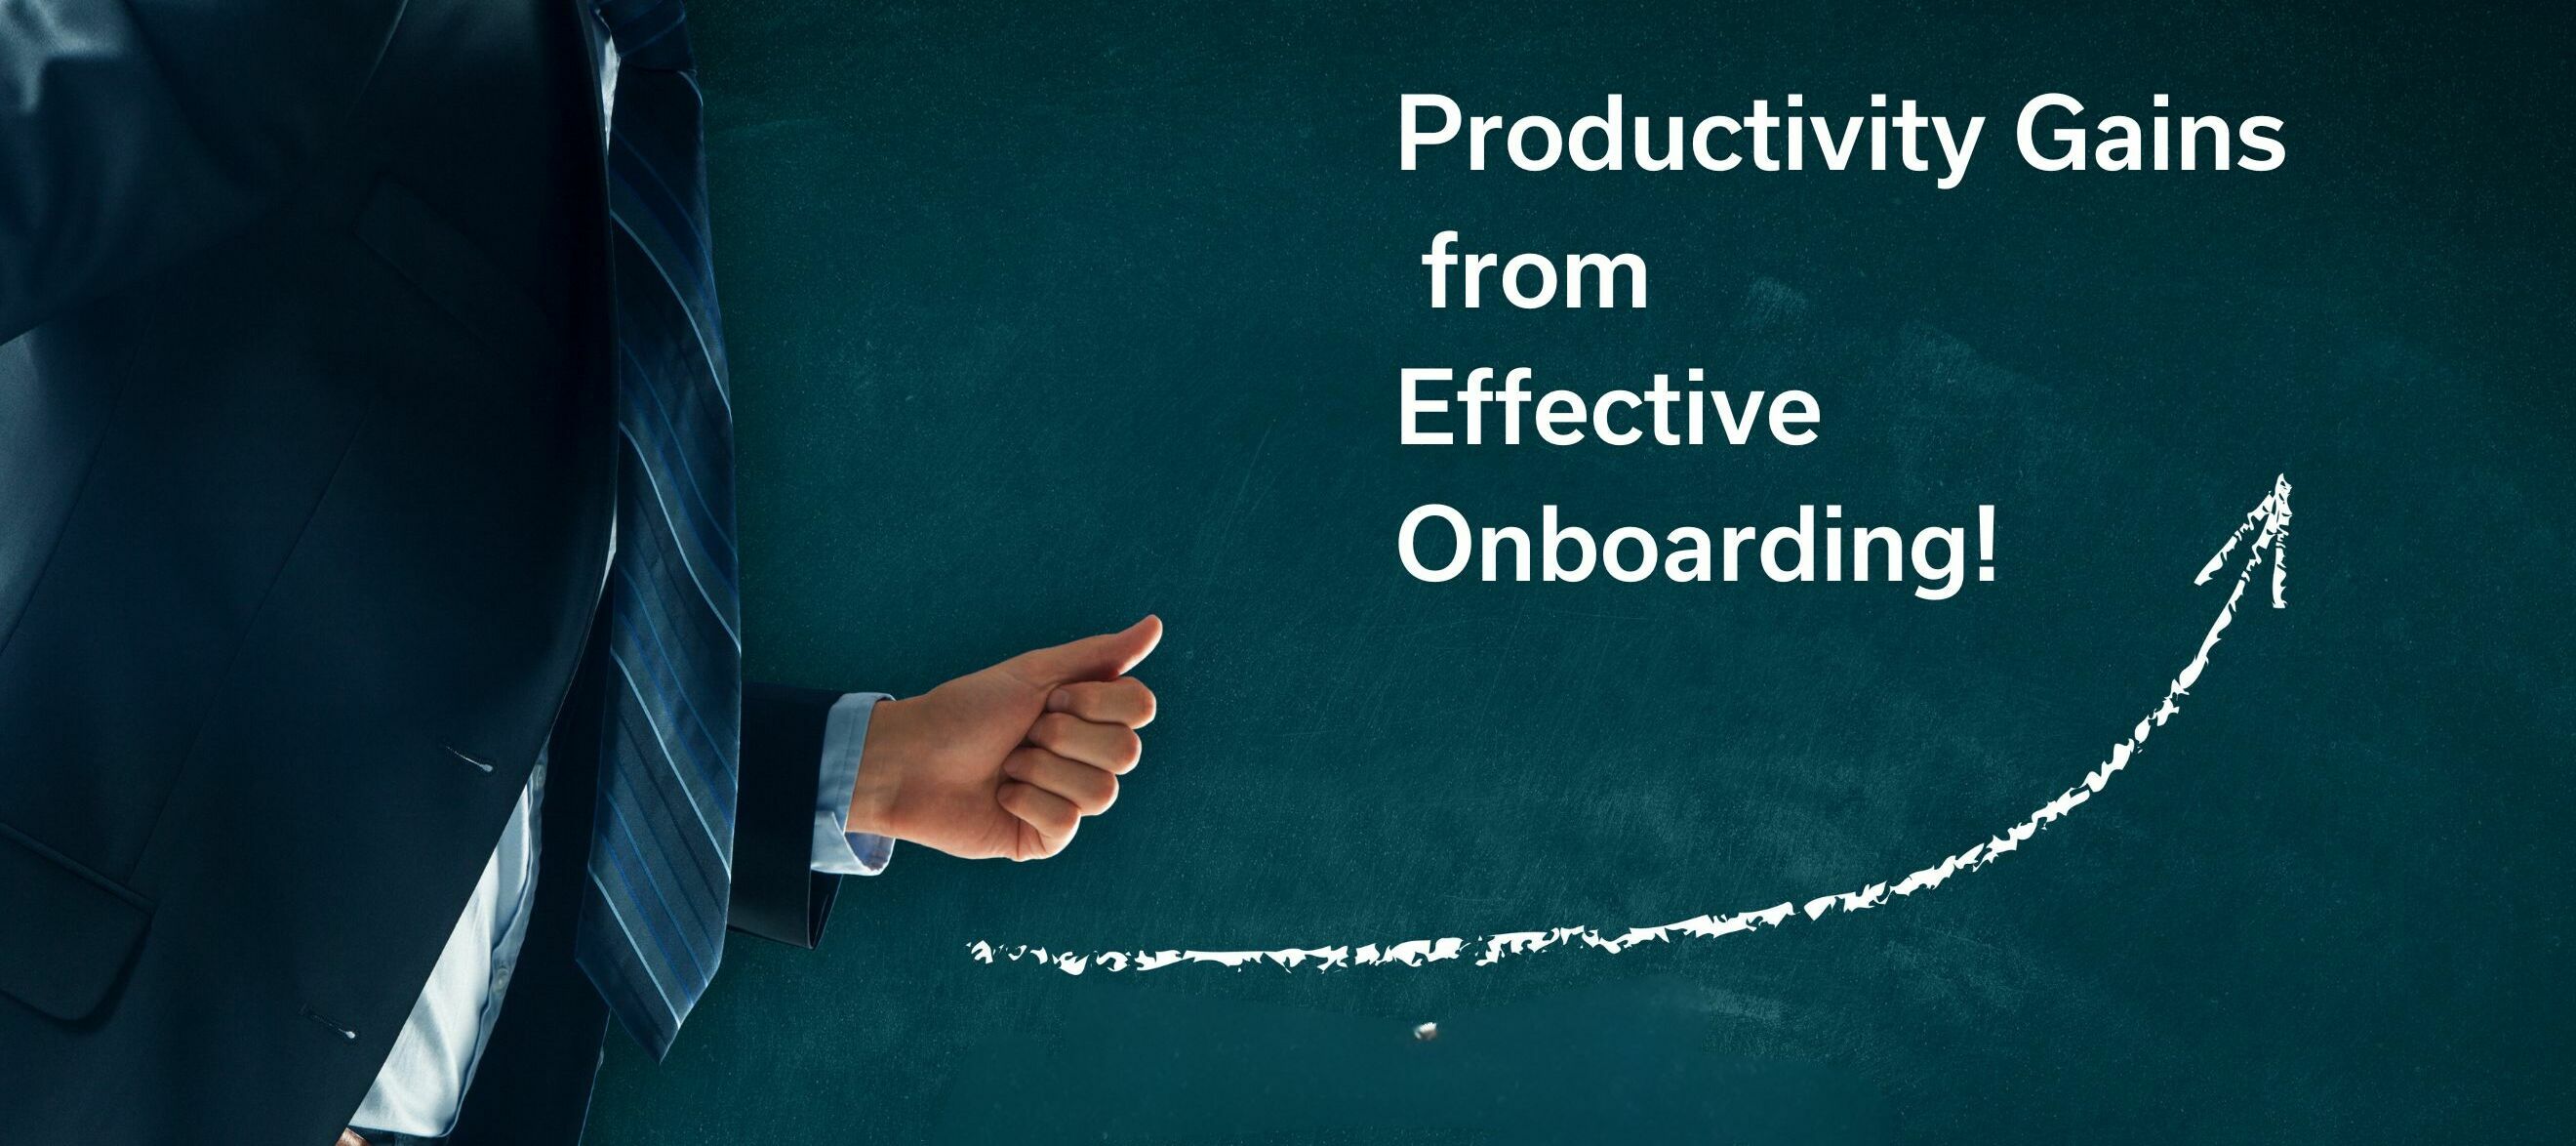 Productivity Gains from Effective Onboarding!